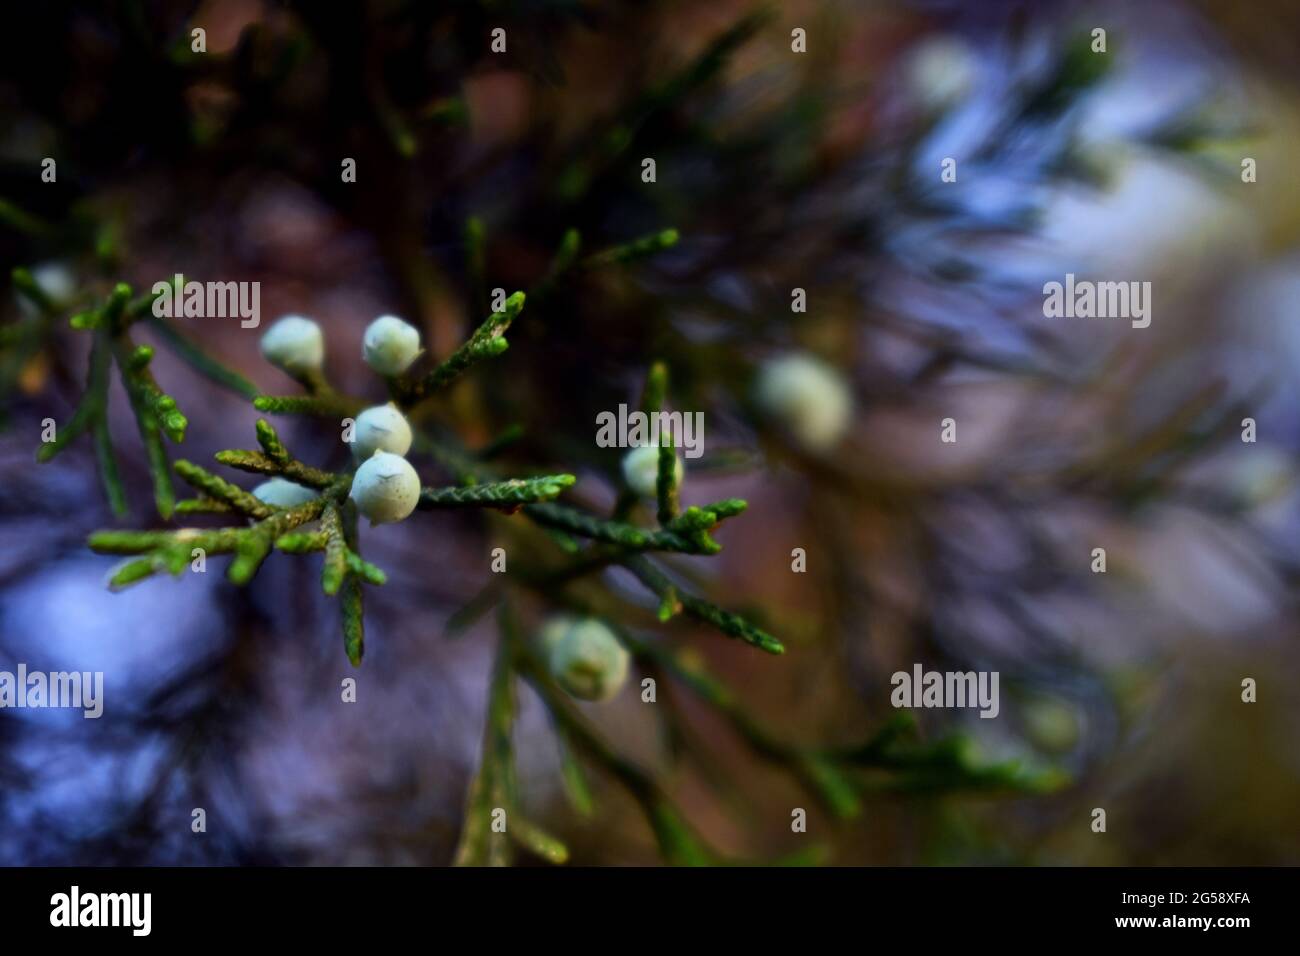 Closeup of light blue berries of a juniper species tree with green leaves. Stock Photo